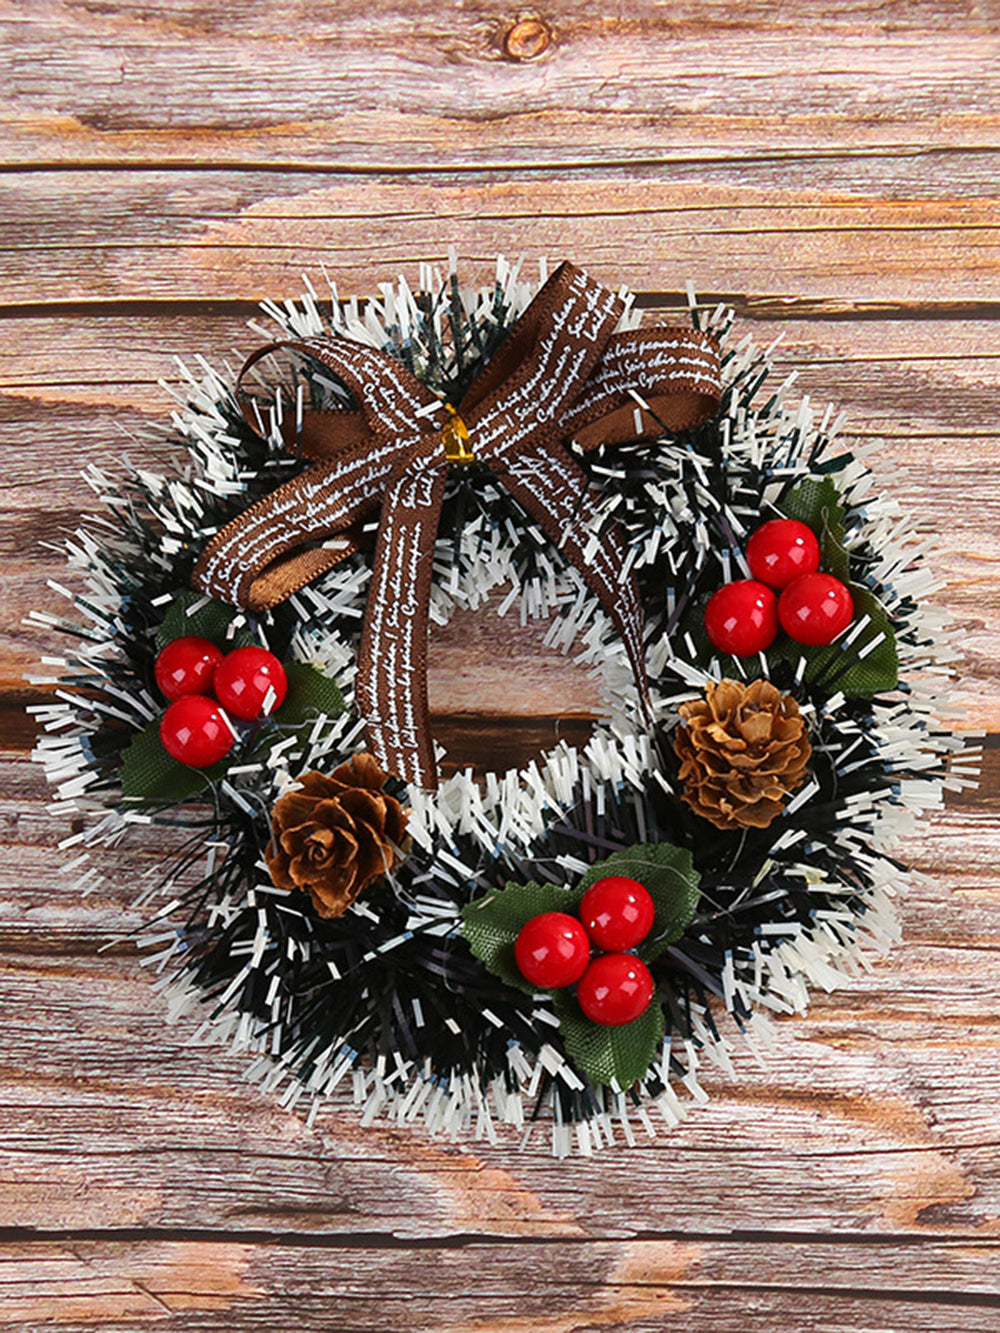 Hanging Christmas Wreaths On Shop Windows And Doors